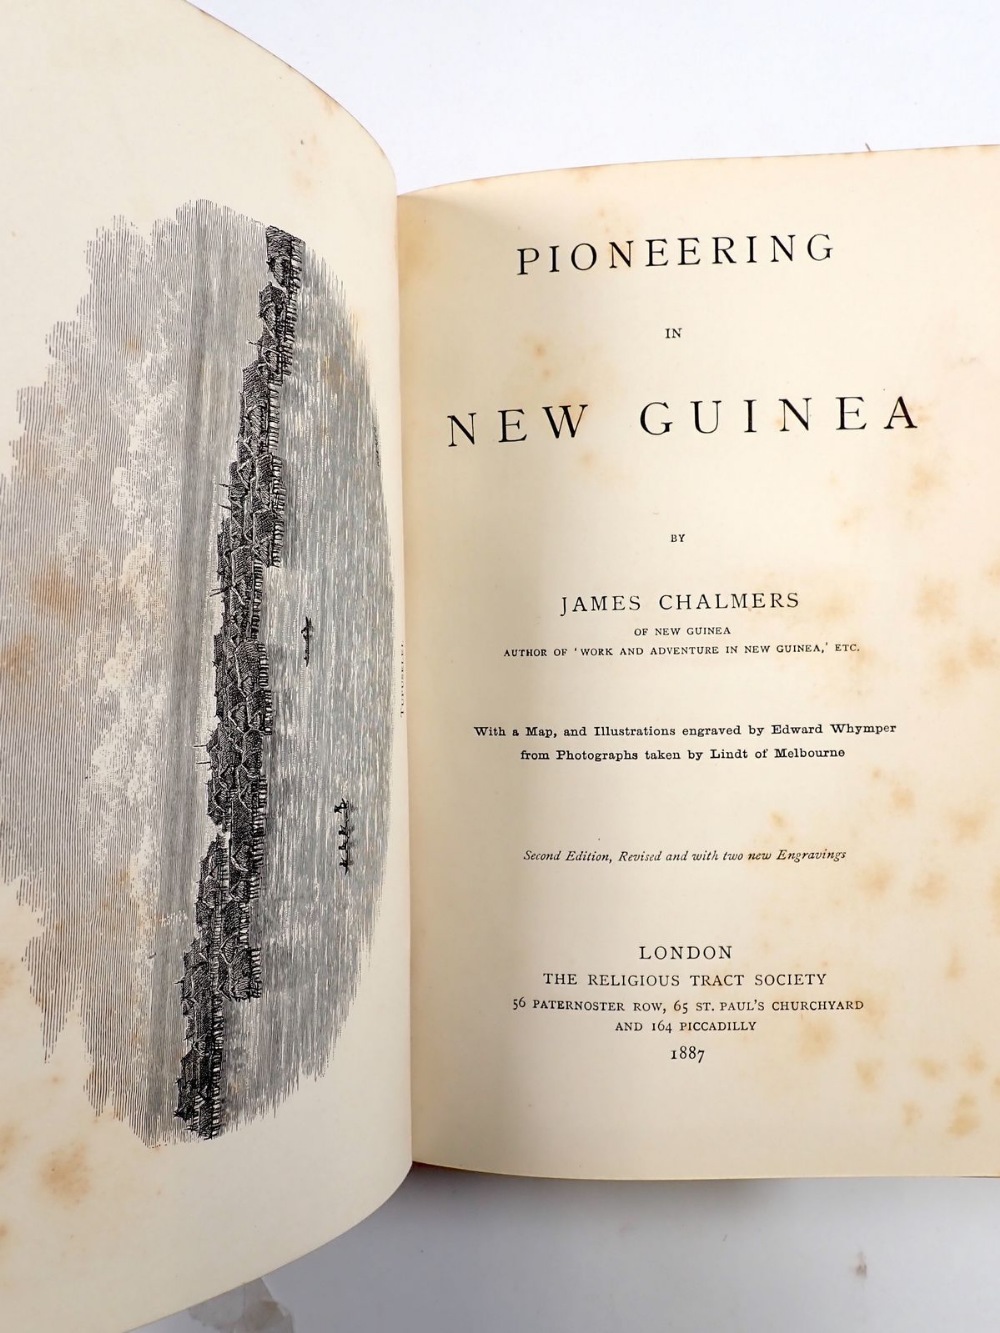 Pioneering in New Guinea by Charles Chalmers, 2nd Edition 1887 - Image 2 of 8